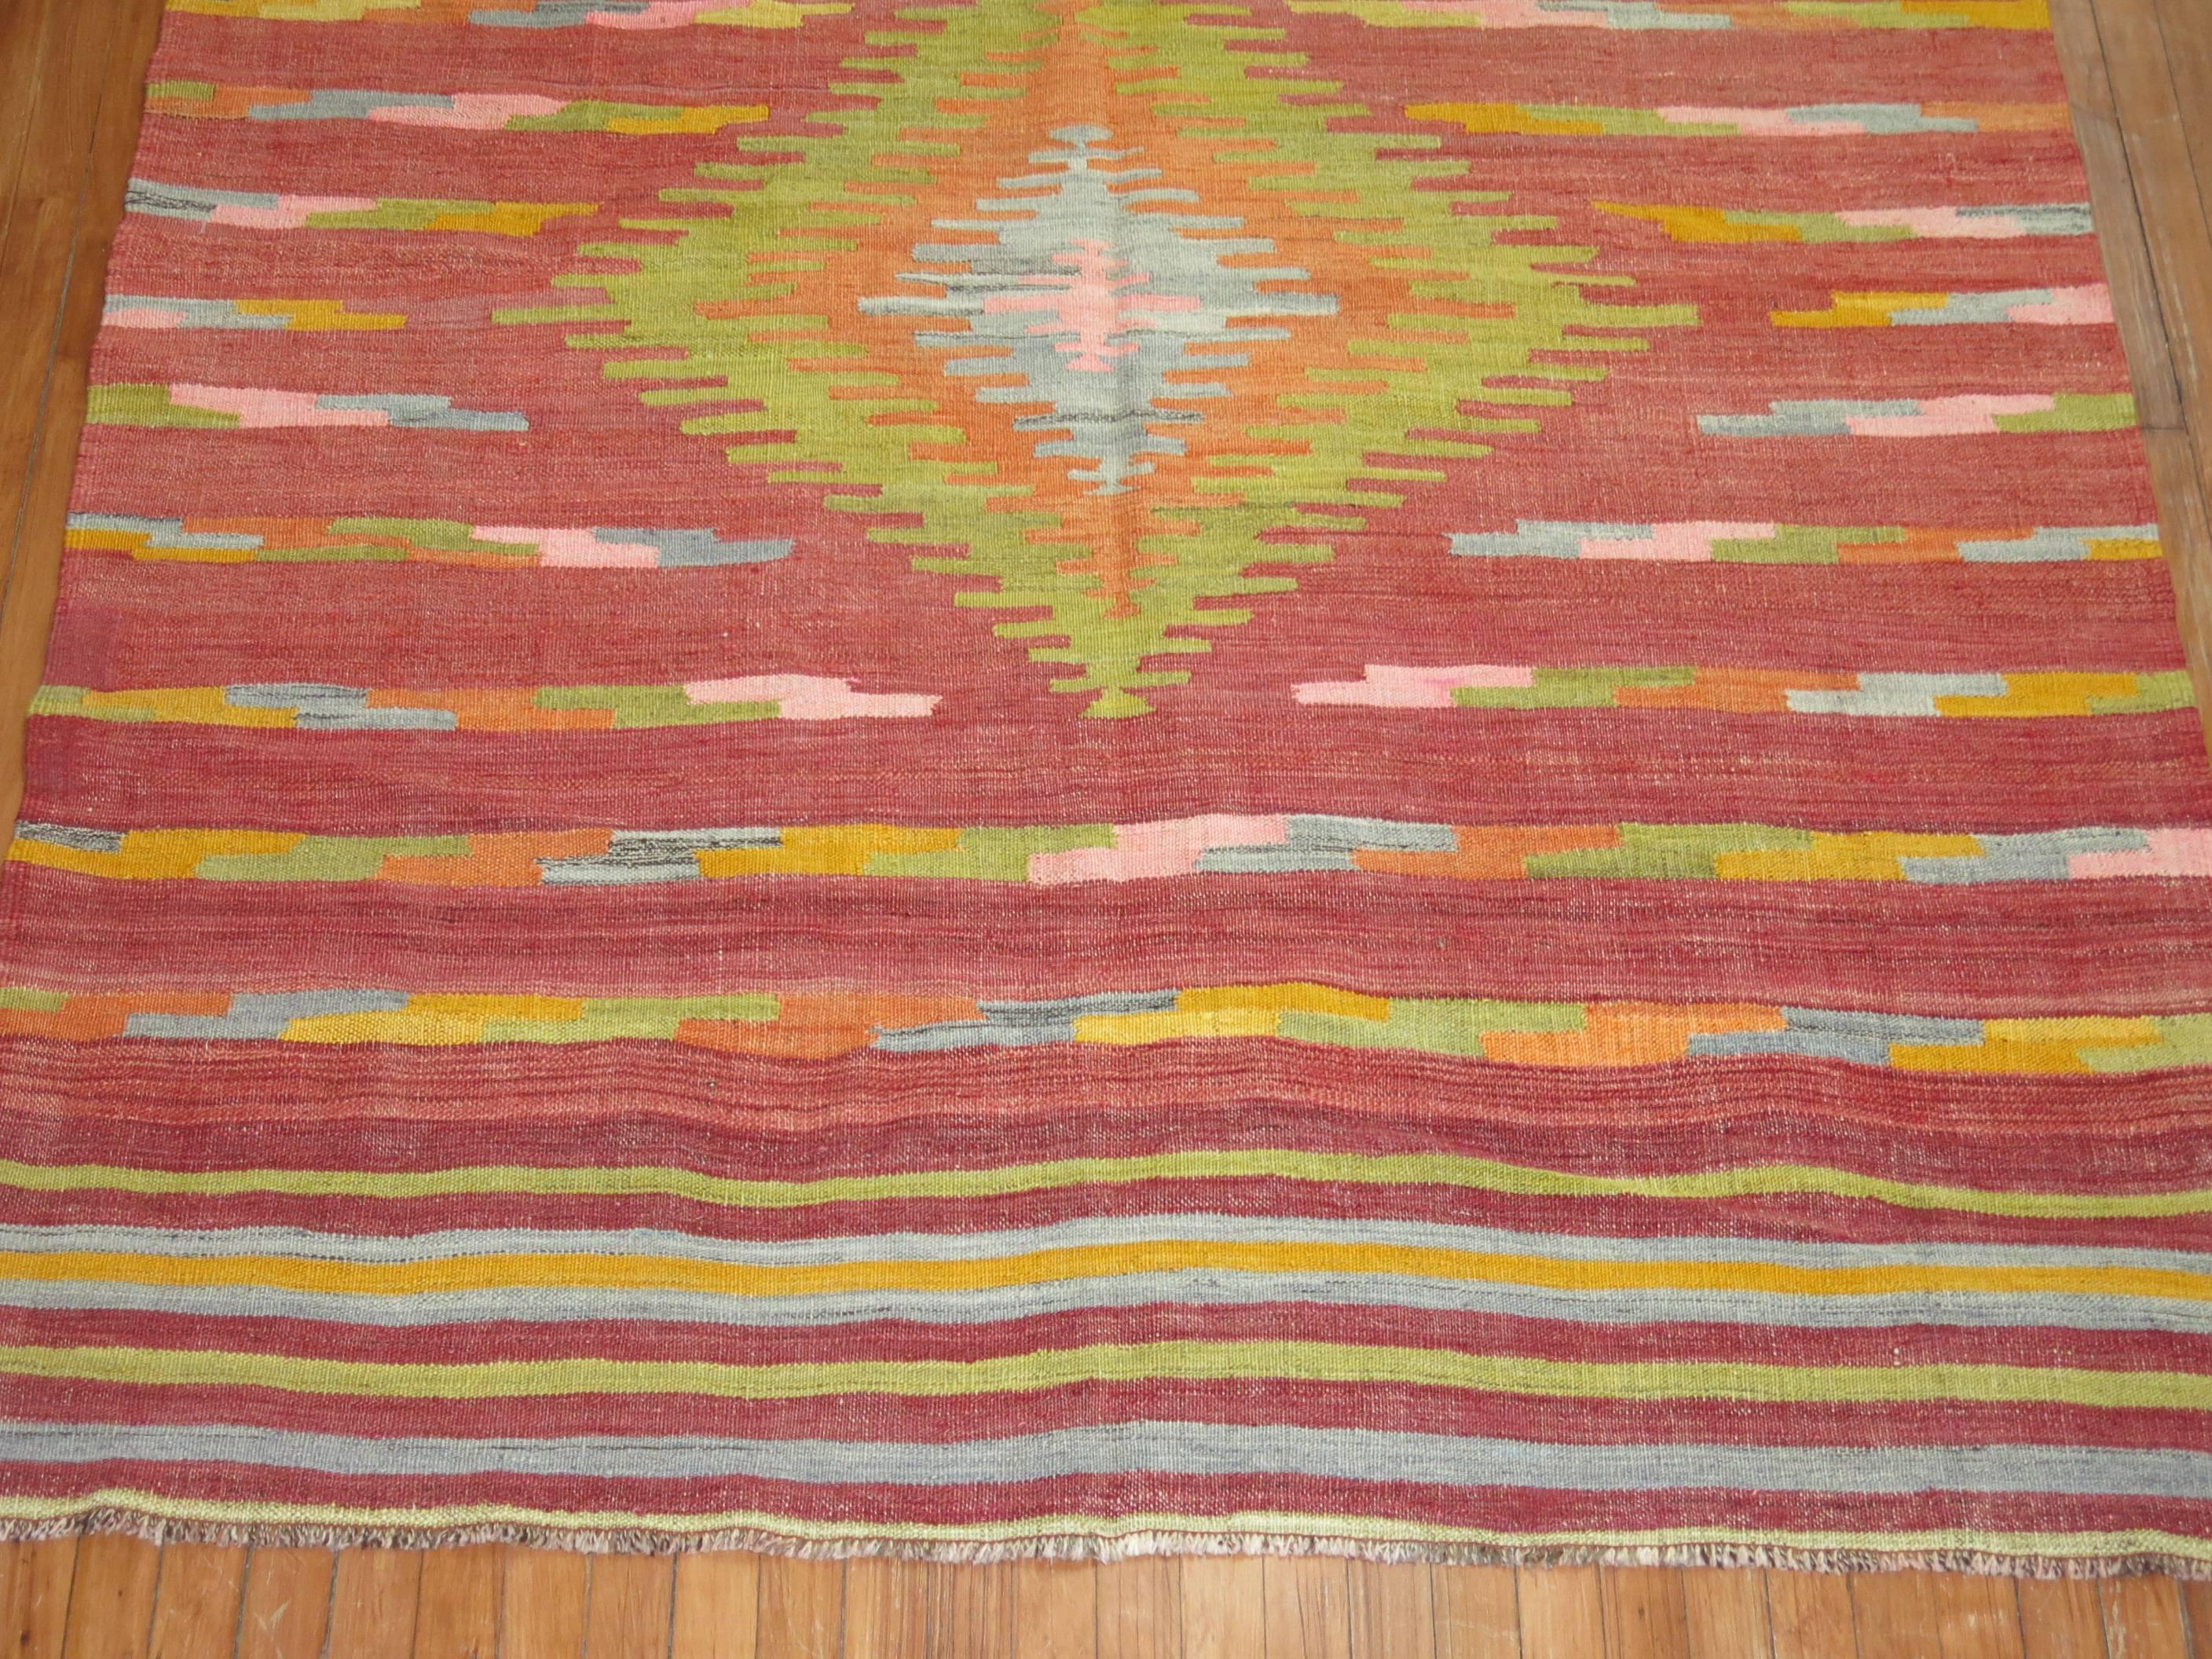 A colorful Turkish Kilim flat-weave rug. Large-scale lime green medallion with accents in orange, pink, gray on a burnt red field with a striped motif on both ends.